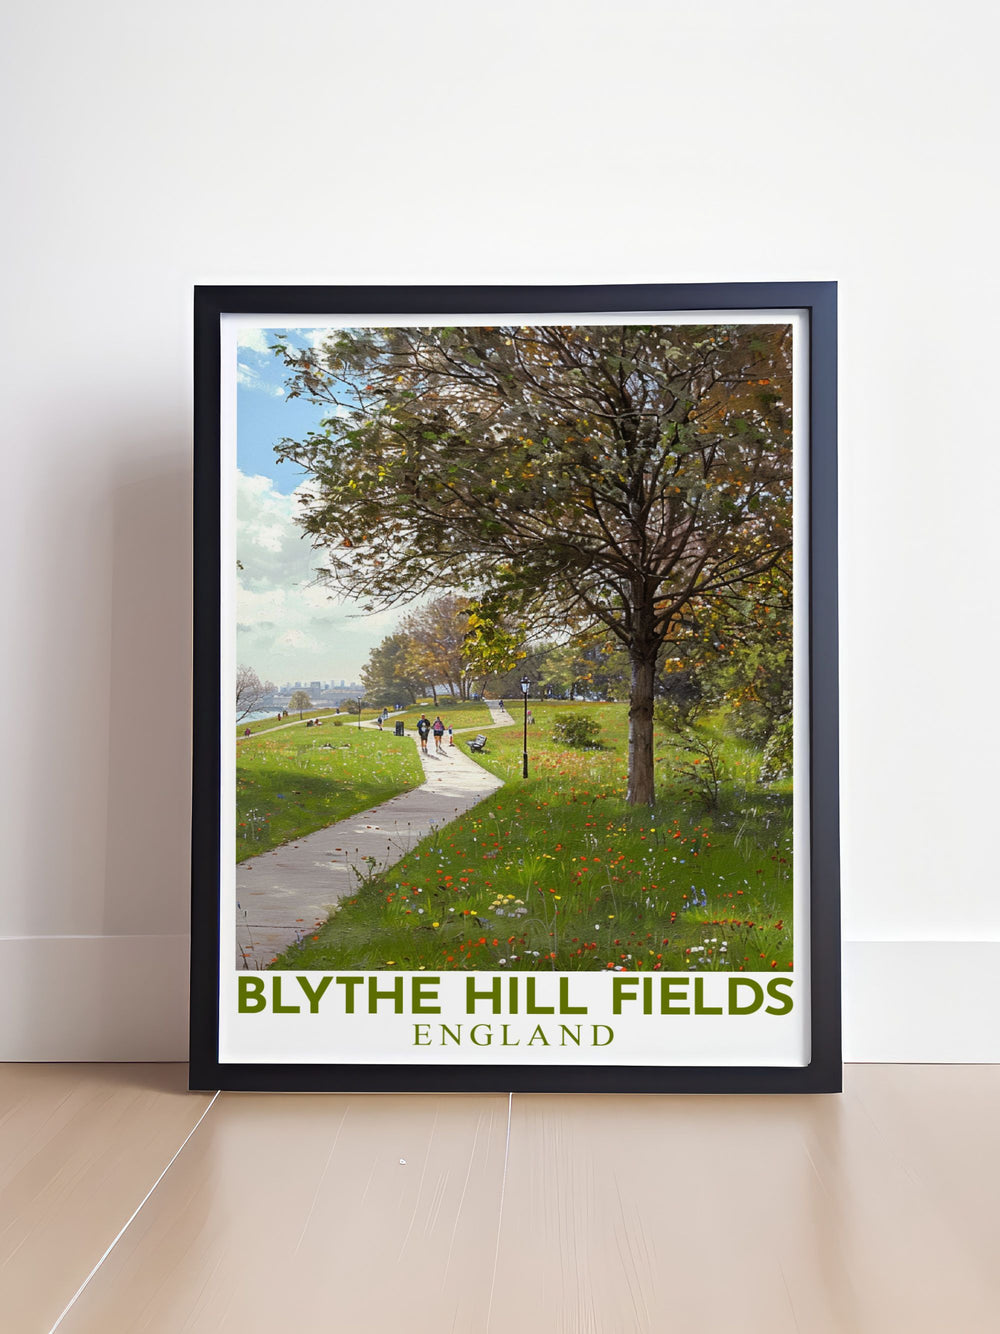 Highlighting the tranquil pathways of Blythe Hill Fields, this travel poster showcases the parks scenic beauty and iconic views of the London skyline, ideal for nature enthusiasts and home decor lovers.